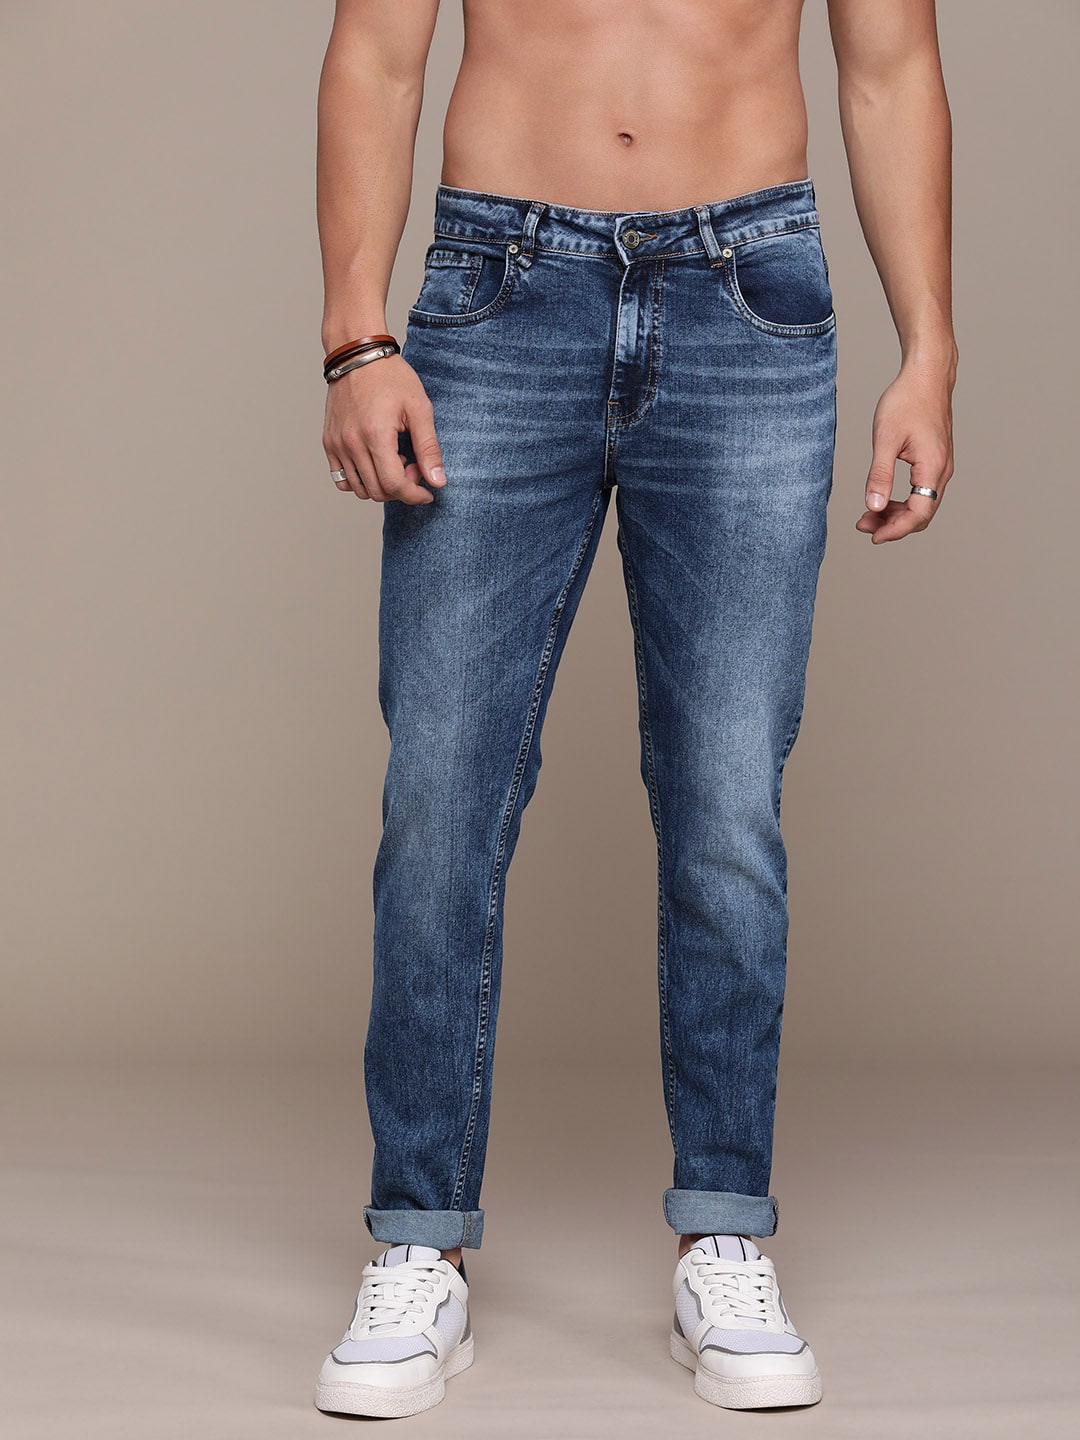 The Roadster Life Co. Men Regular Fit Heavy Fade Stretchable Jeans